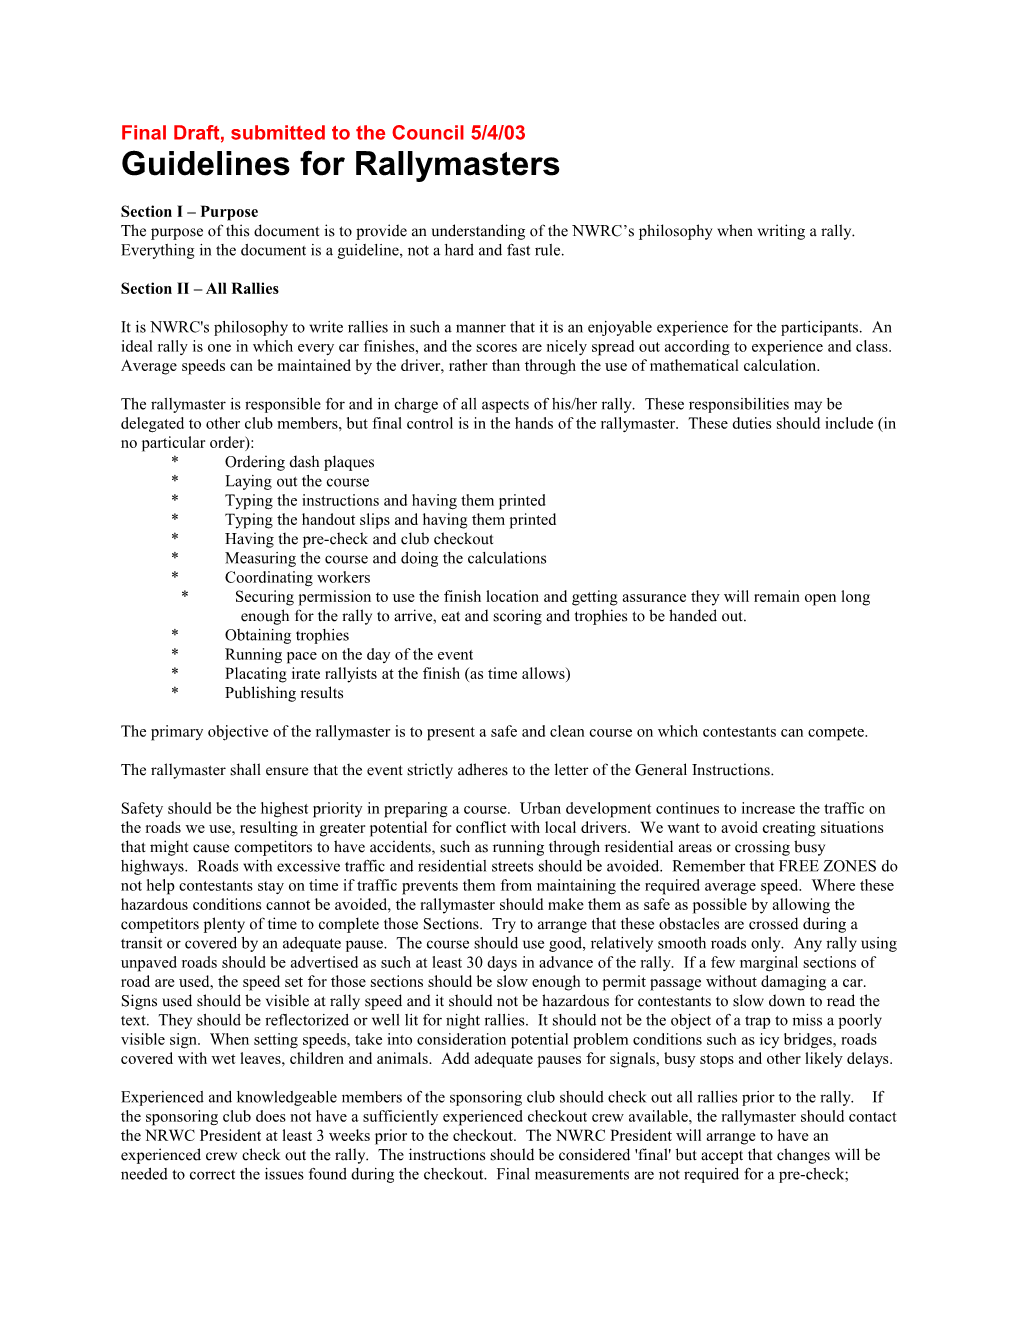 Guidelines for Rallymasters